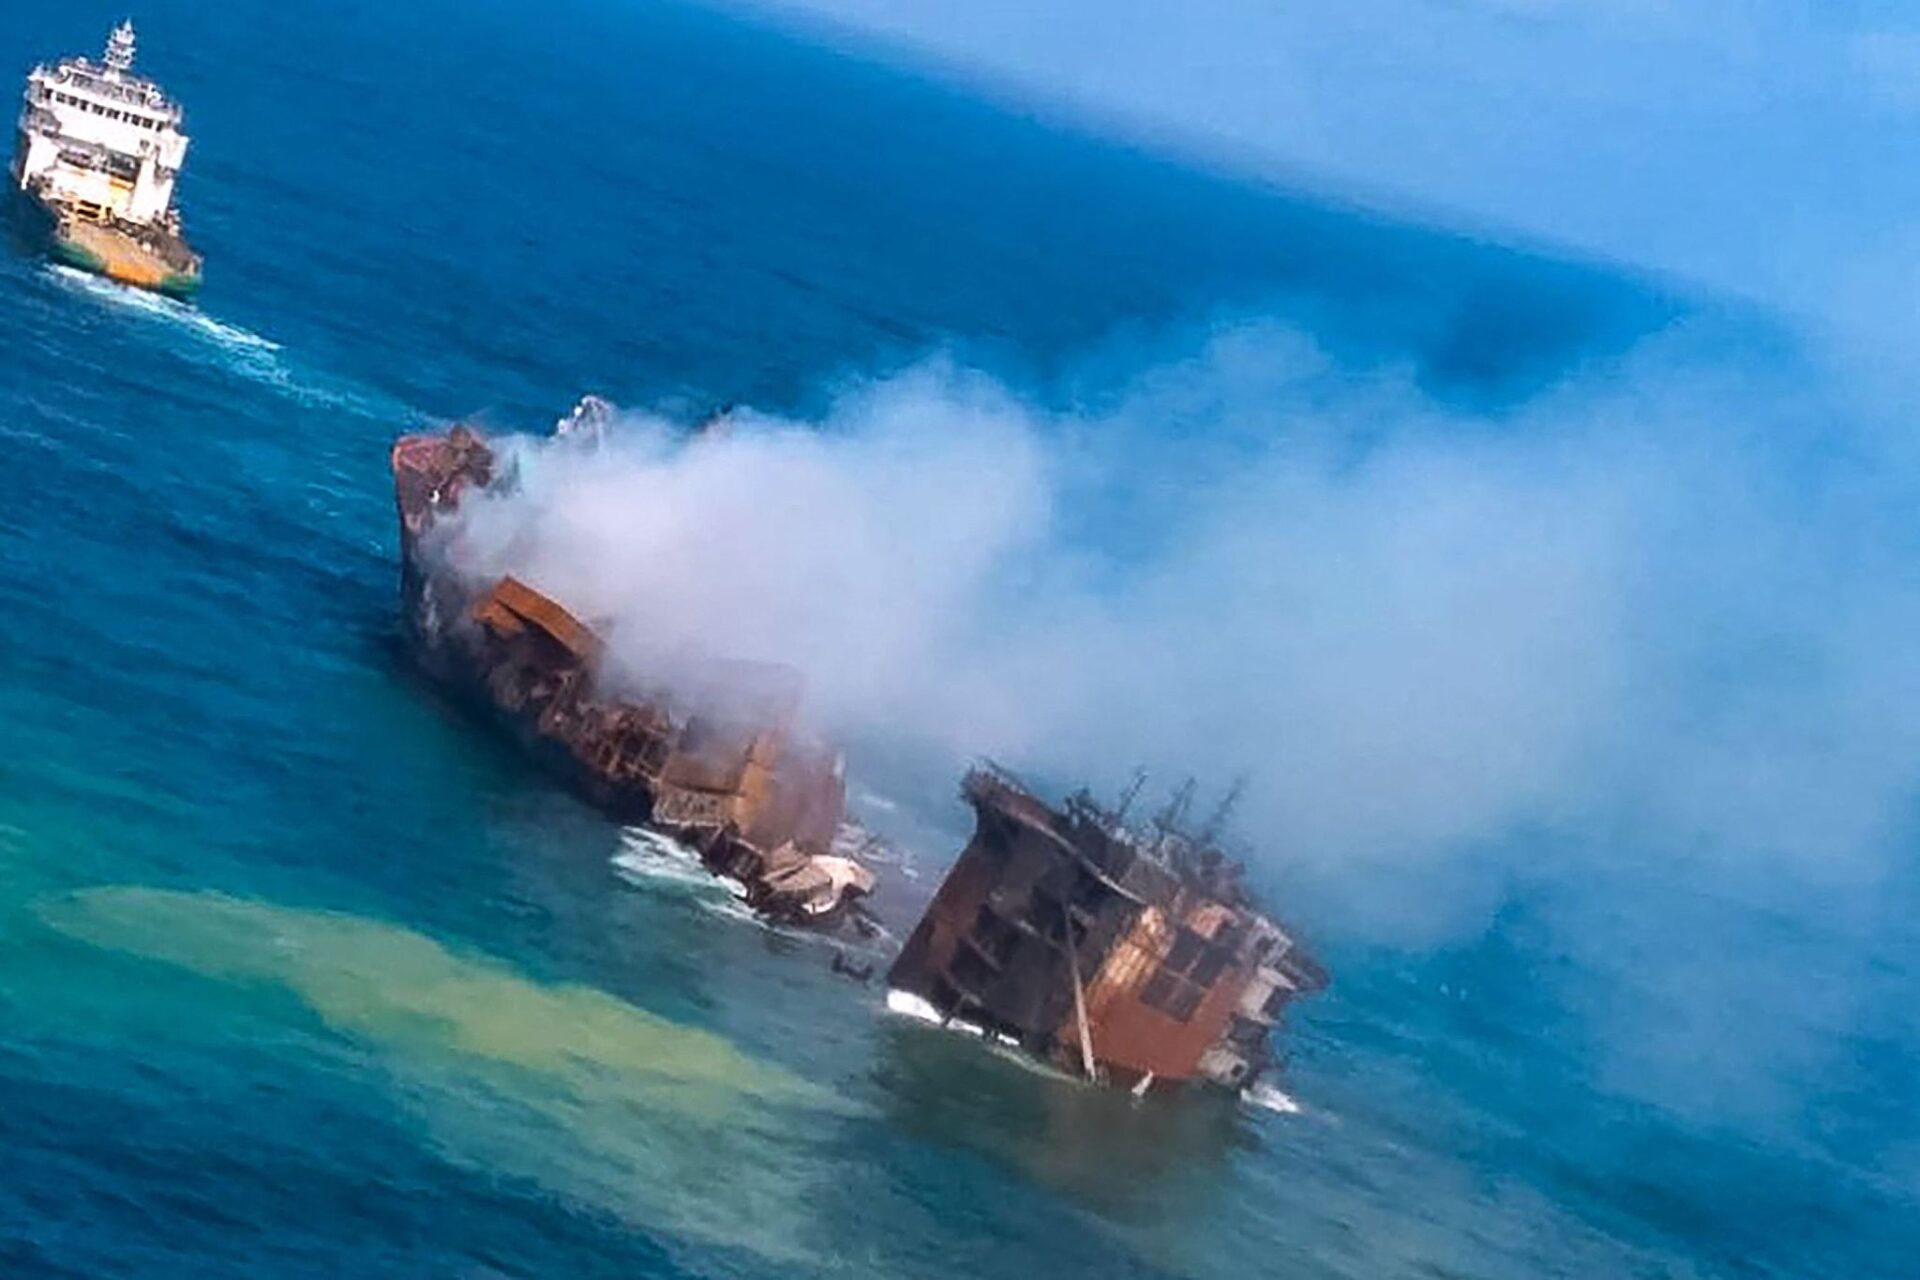 A sunken container ship in Sri Lanka could lead to an environmental crisis